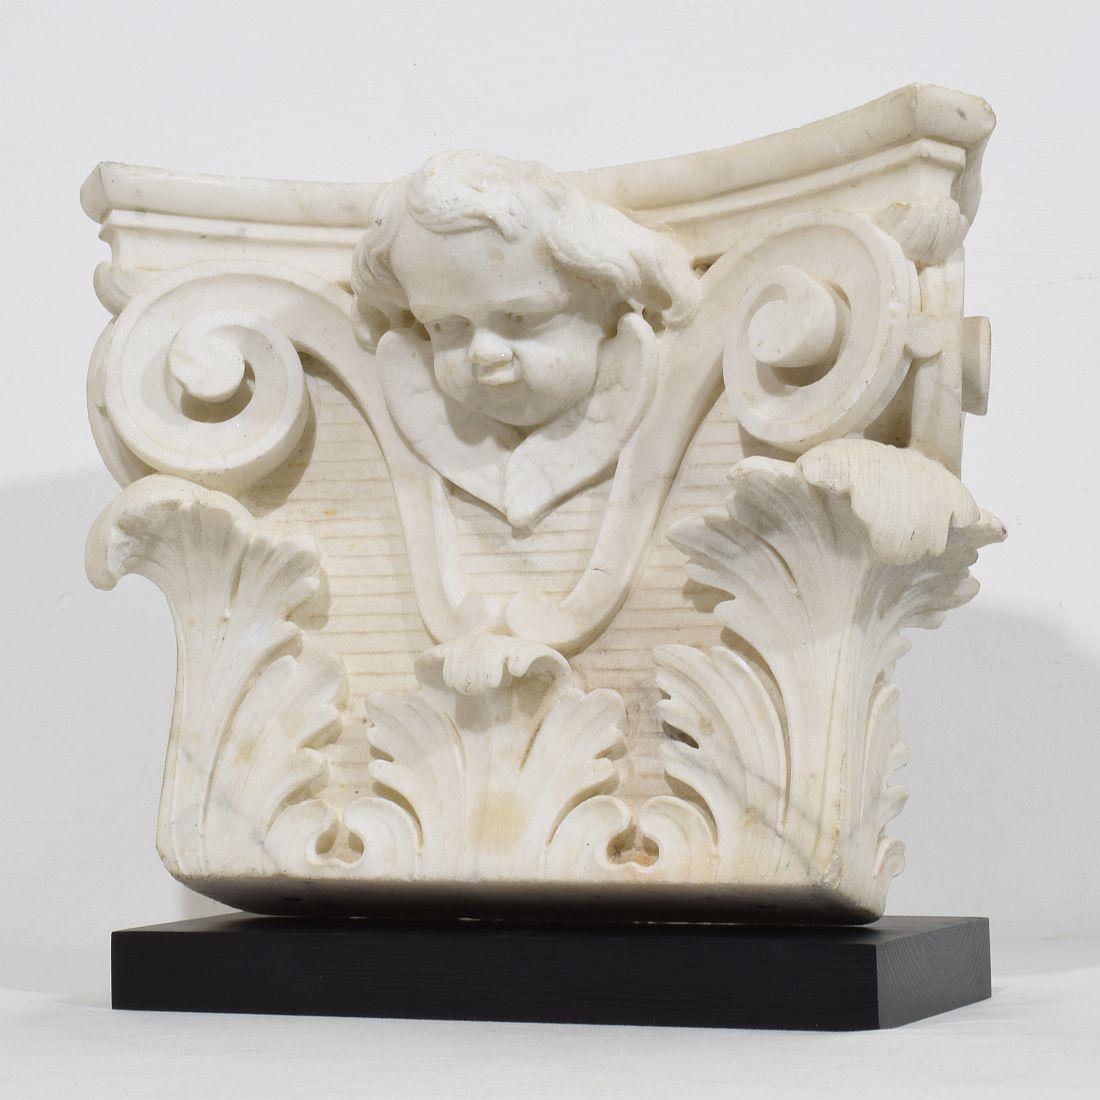 Spectacular hand-carved white marble capital with angel head. 
Beautiful weathered white marble .
France circa 1750
Weathered
Measurements include the wooden pedestal